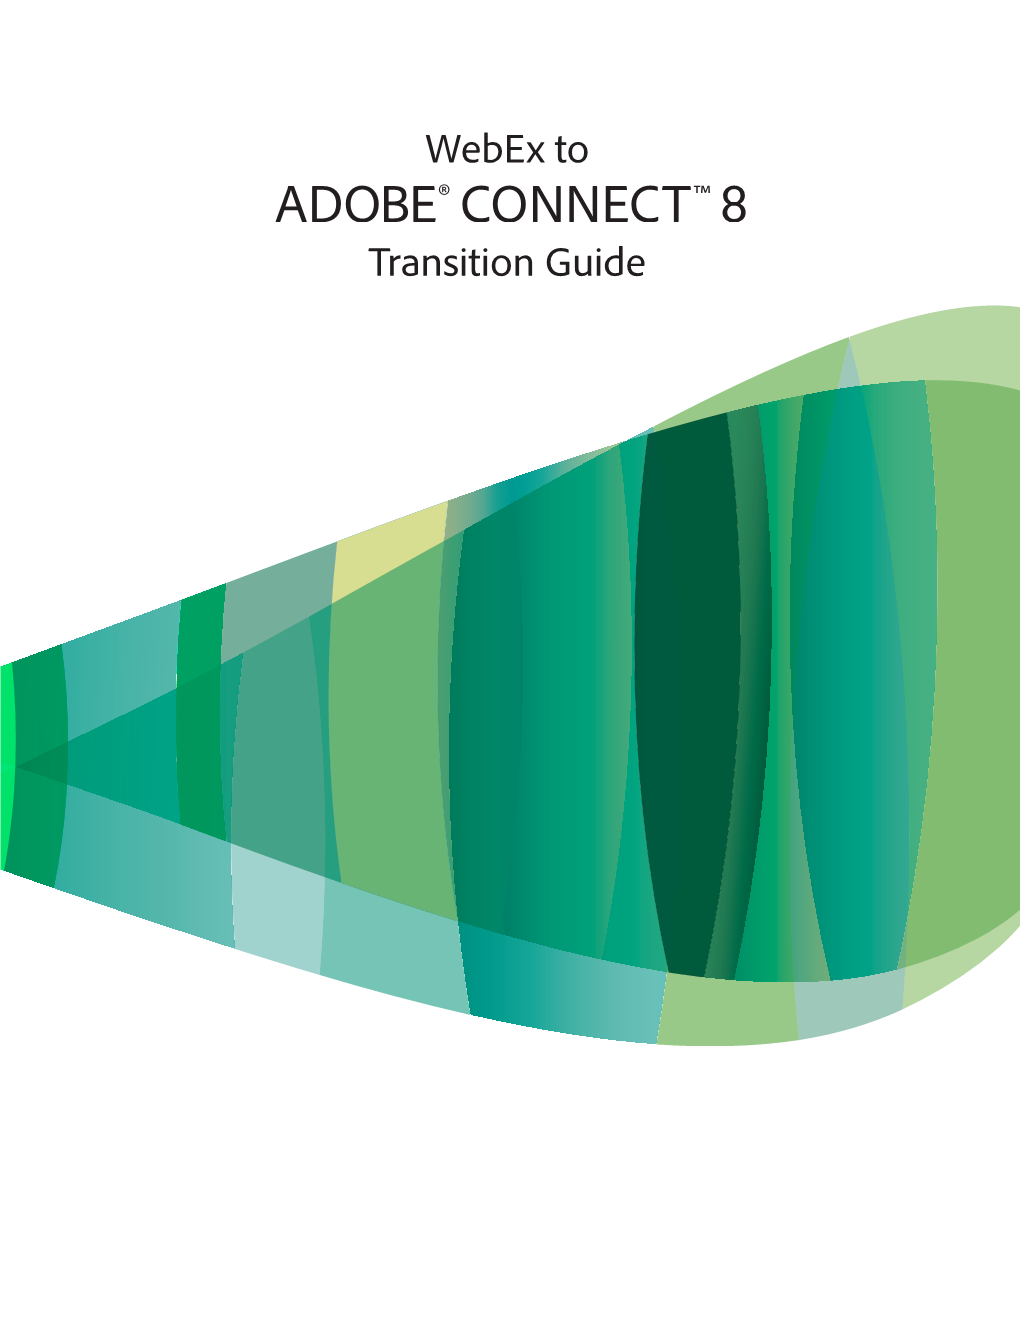 Webex to Adobe Connect Transition Guide